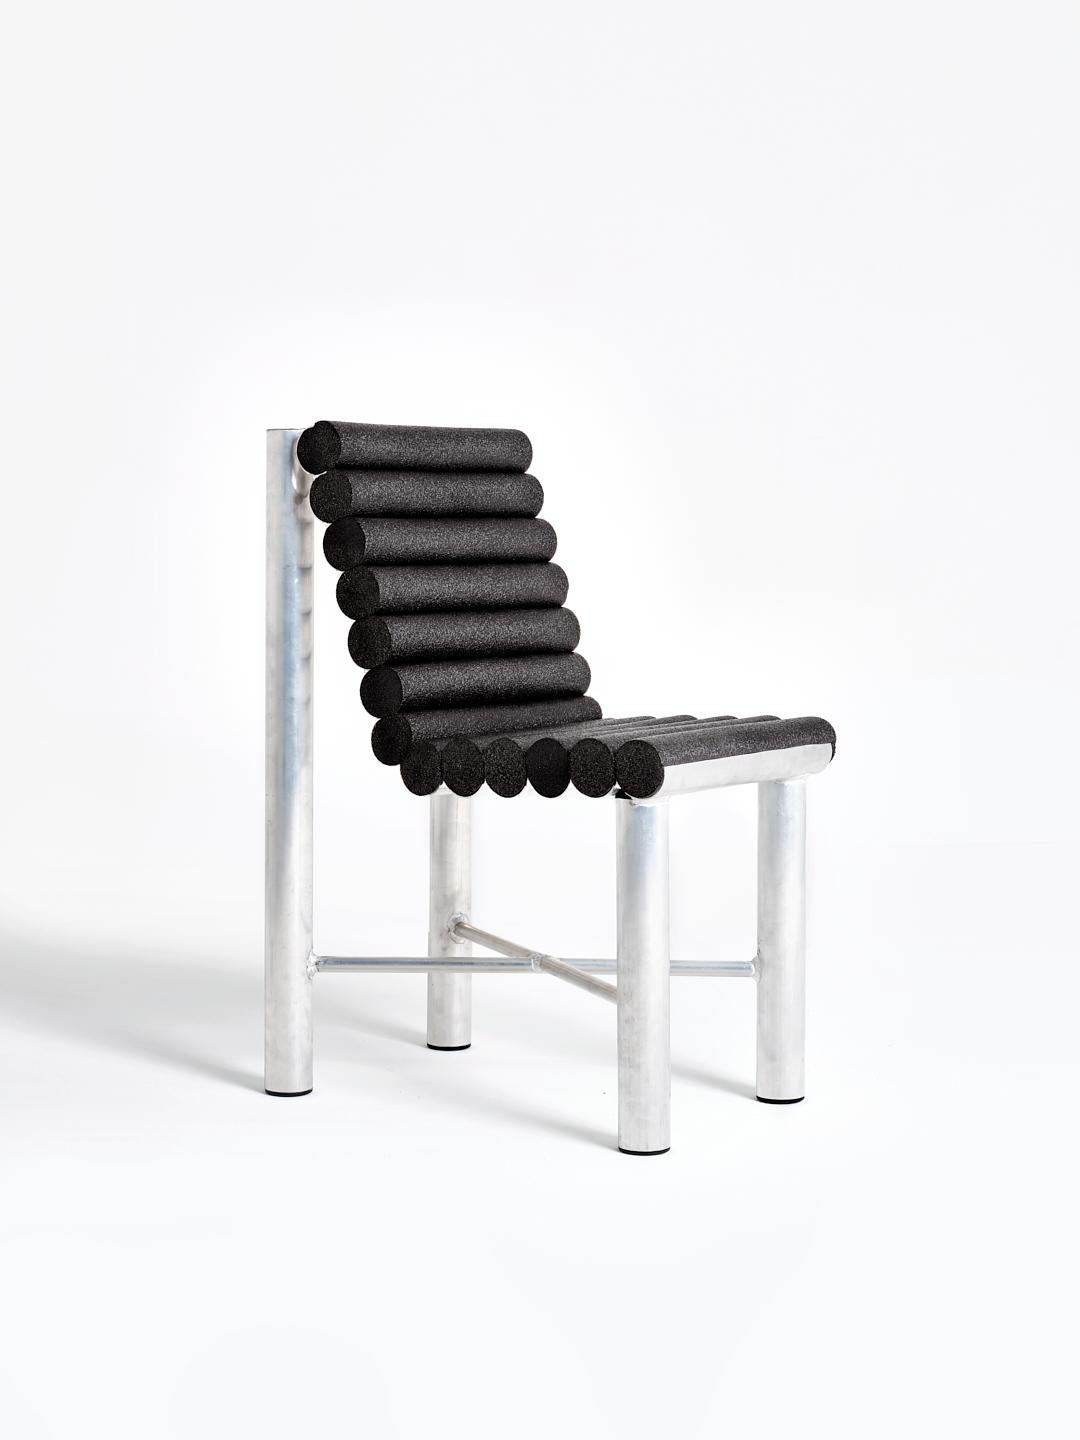 French Contemporary Aluminium Chair Model ''Piscine'' by Axel Chay, Marseille France